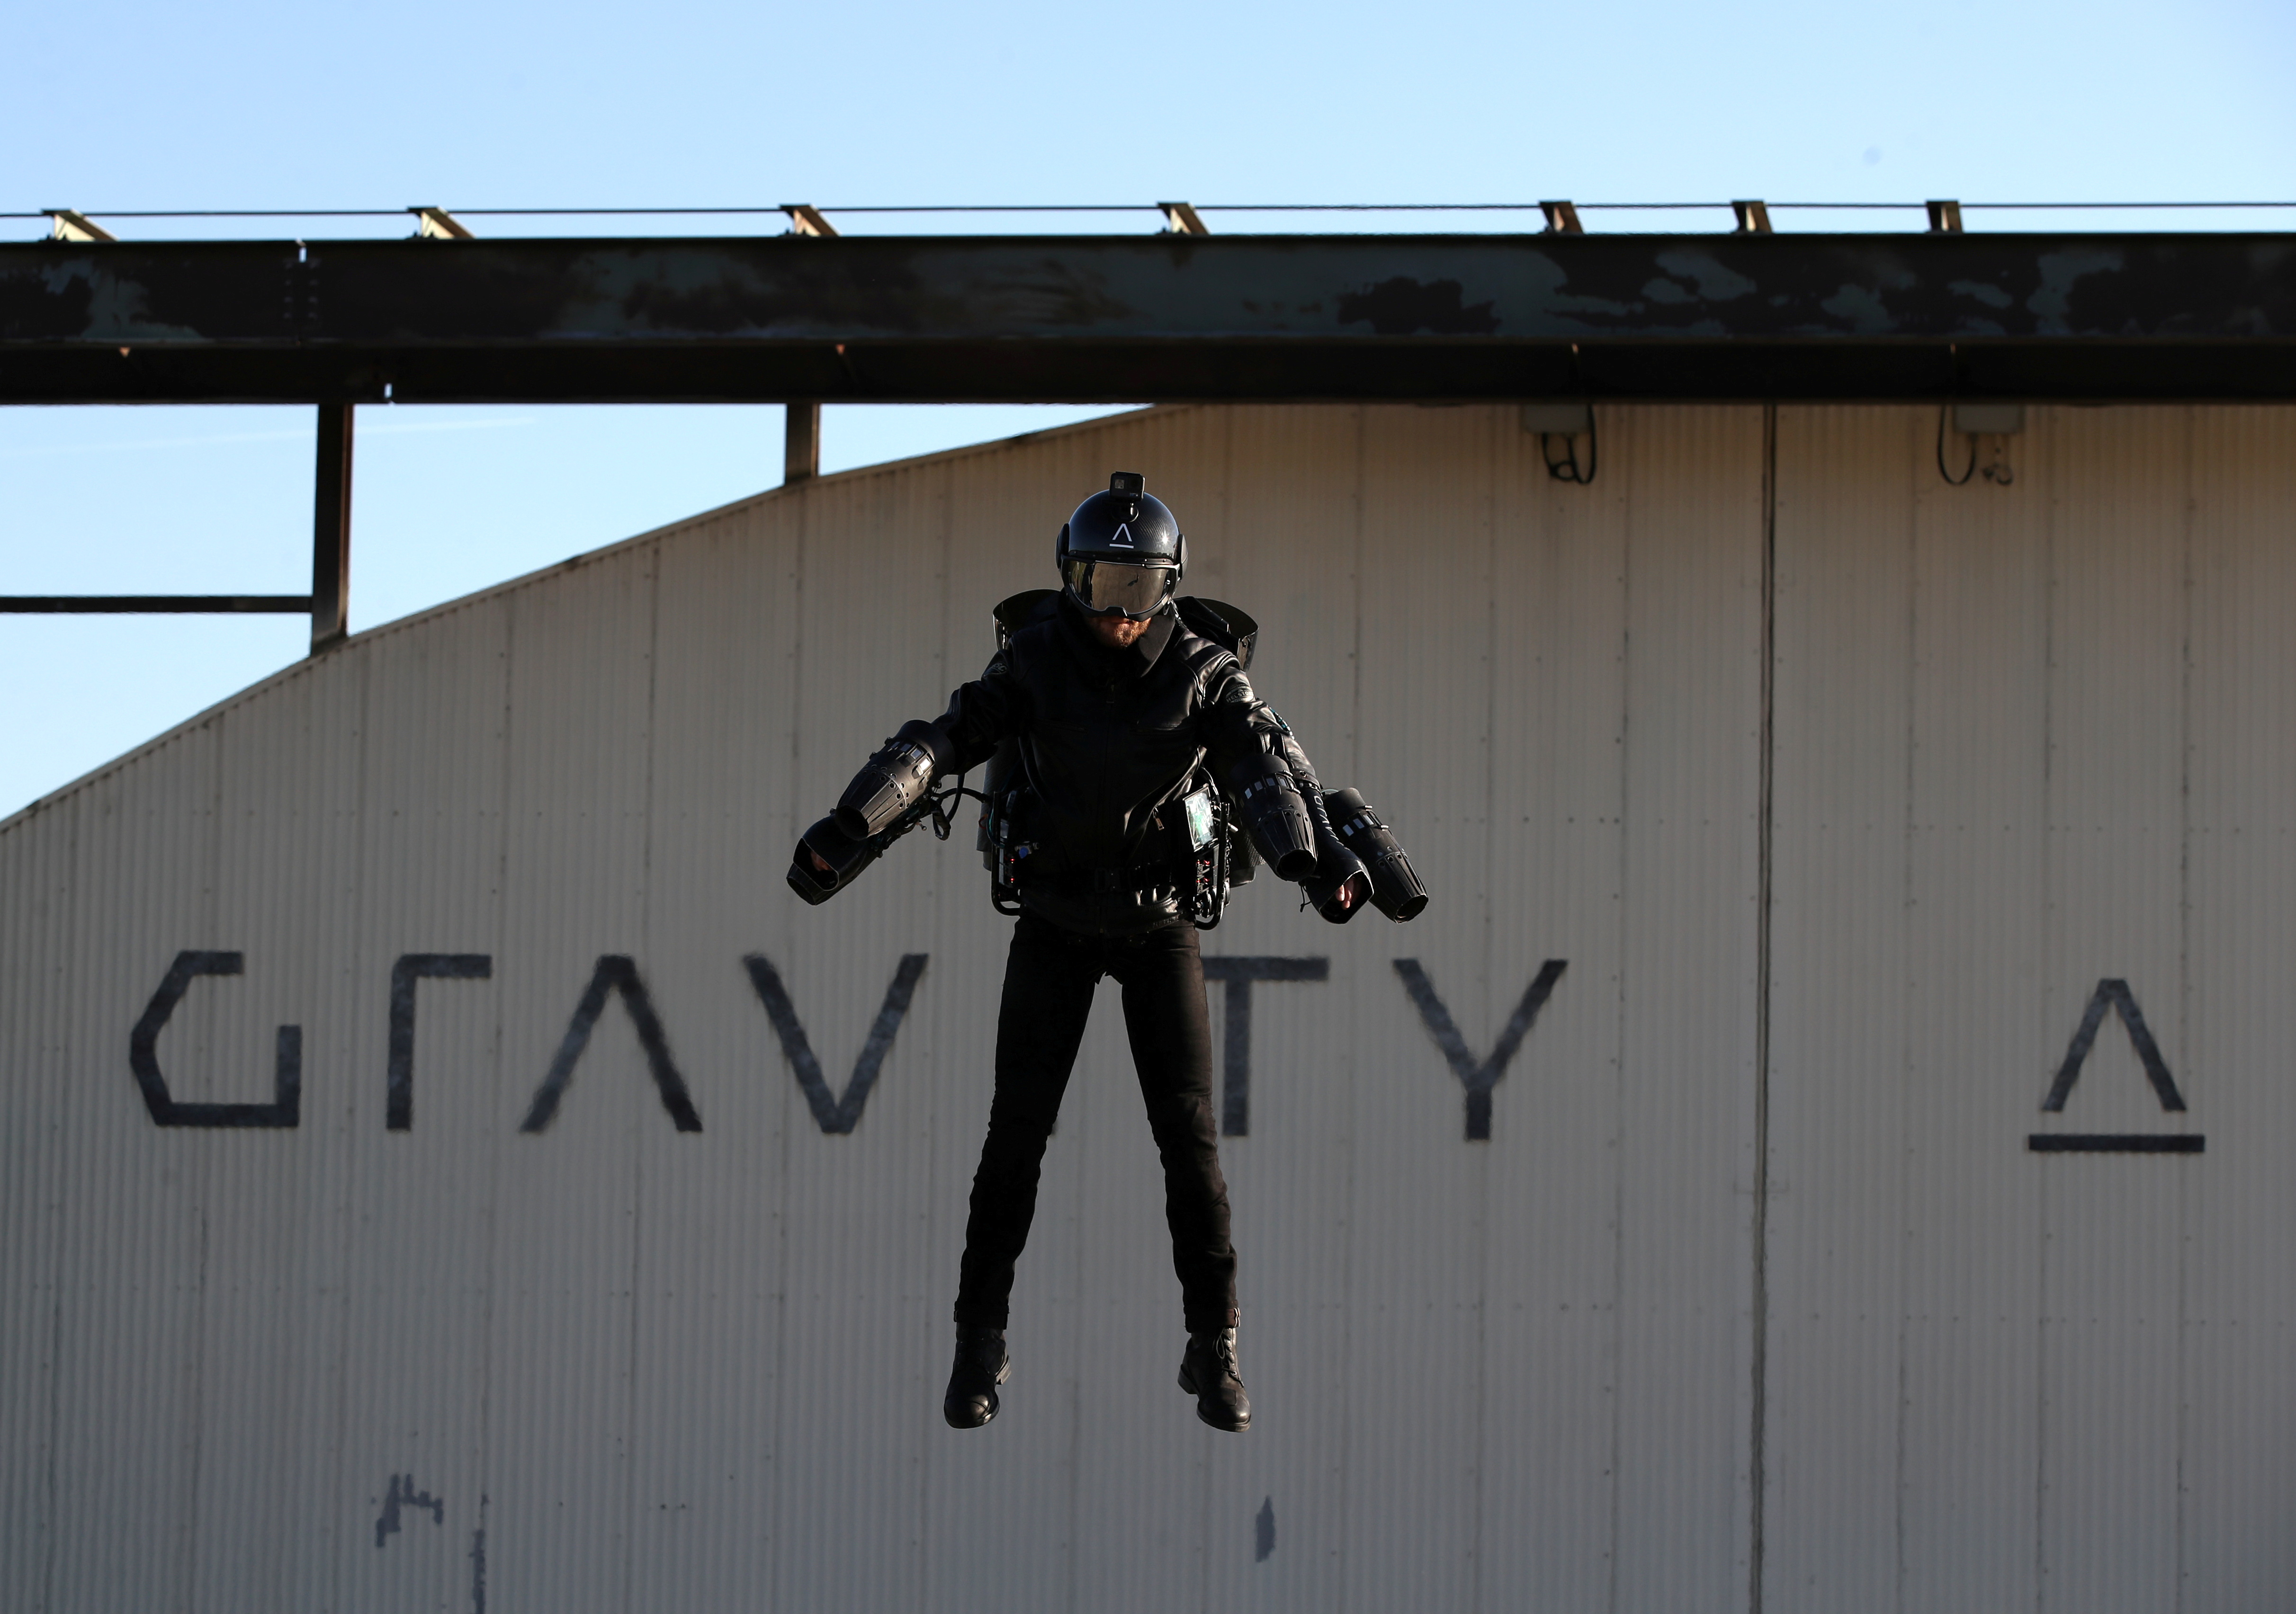 Richard Browning, Chief Test Pilot and CEO of Gravity Industries, wears a Jet Suit and flies during a demonstration flight at Bentwaters Park, Woodbridge